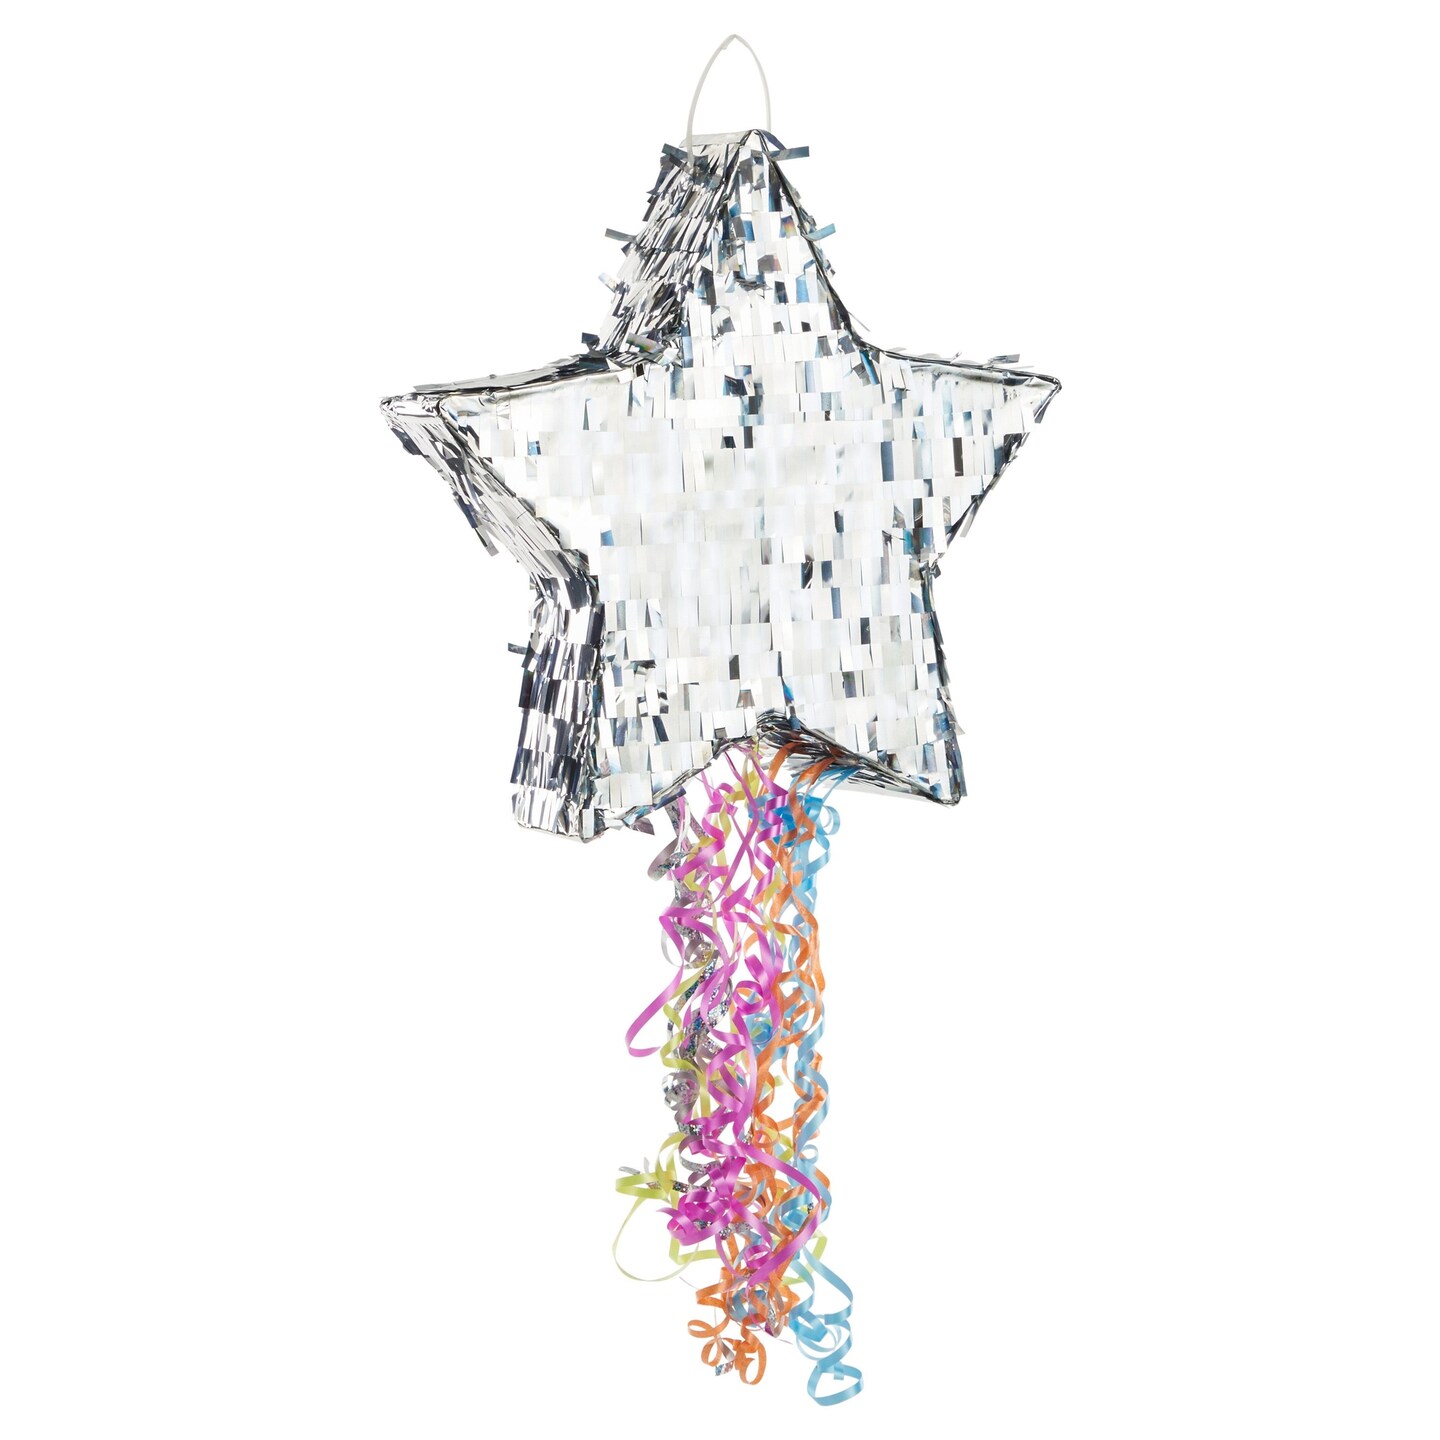 Silver Foil Star Pinata with Pull Strings for Birthday Party